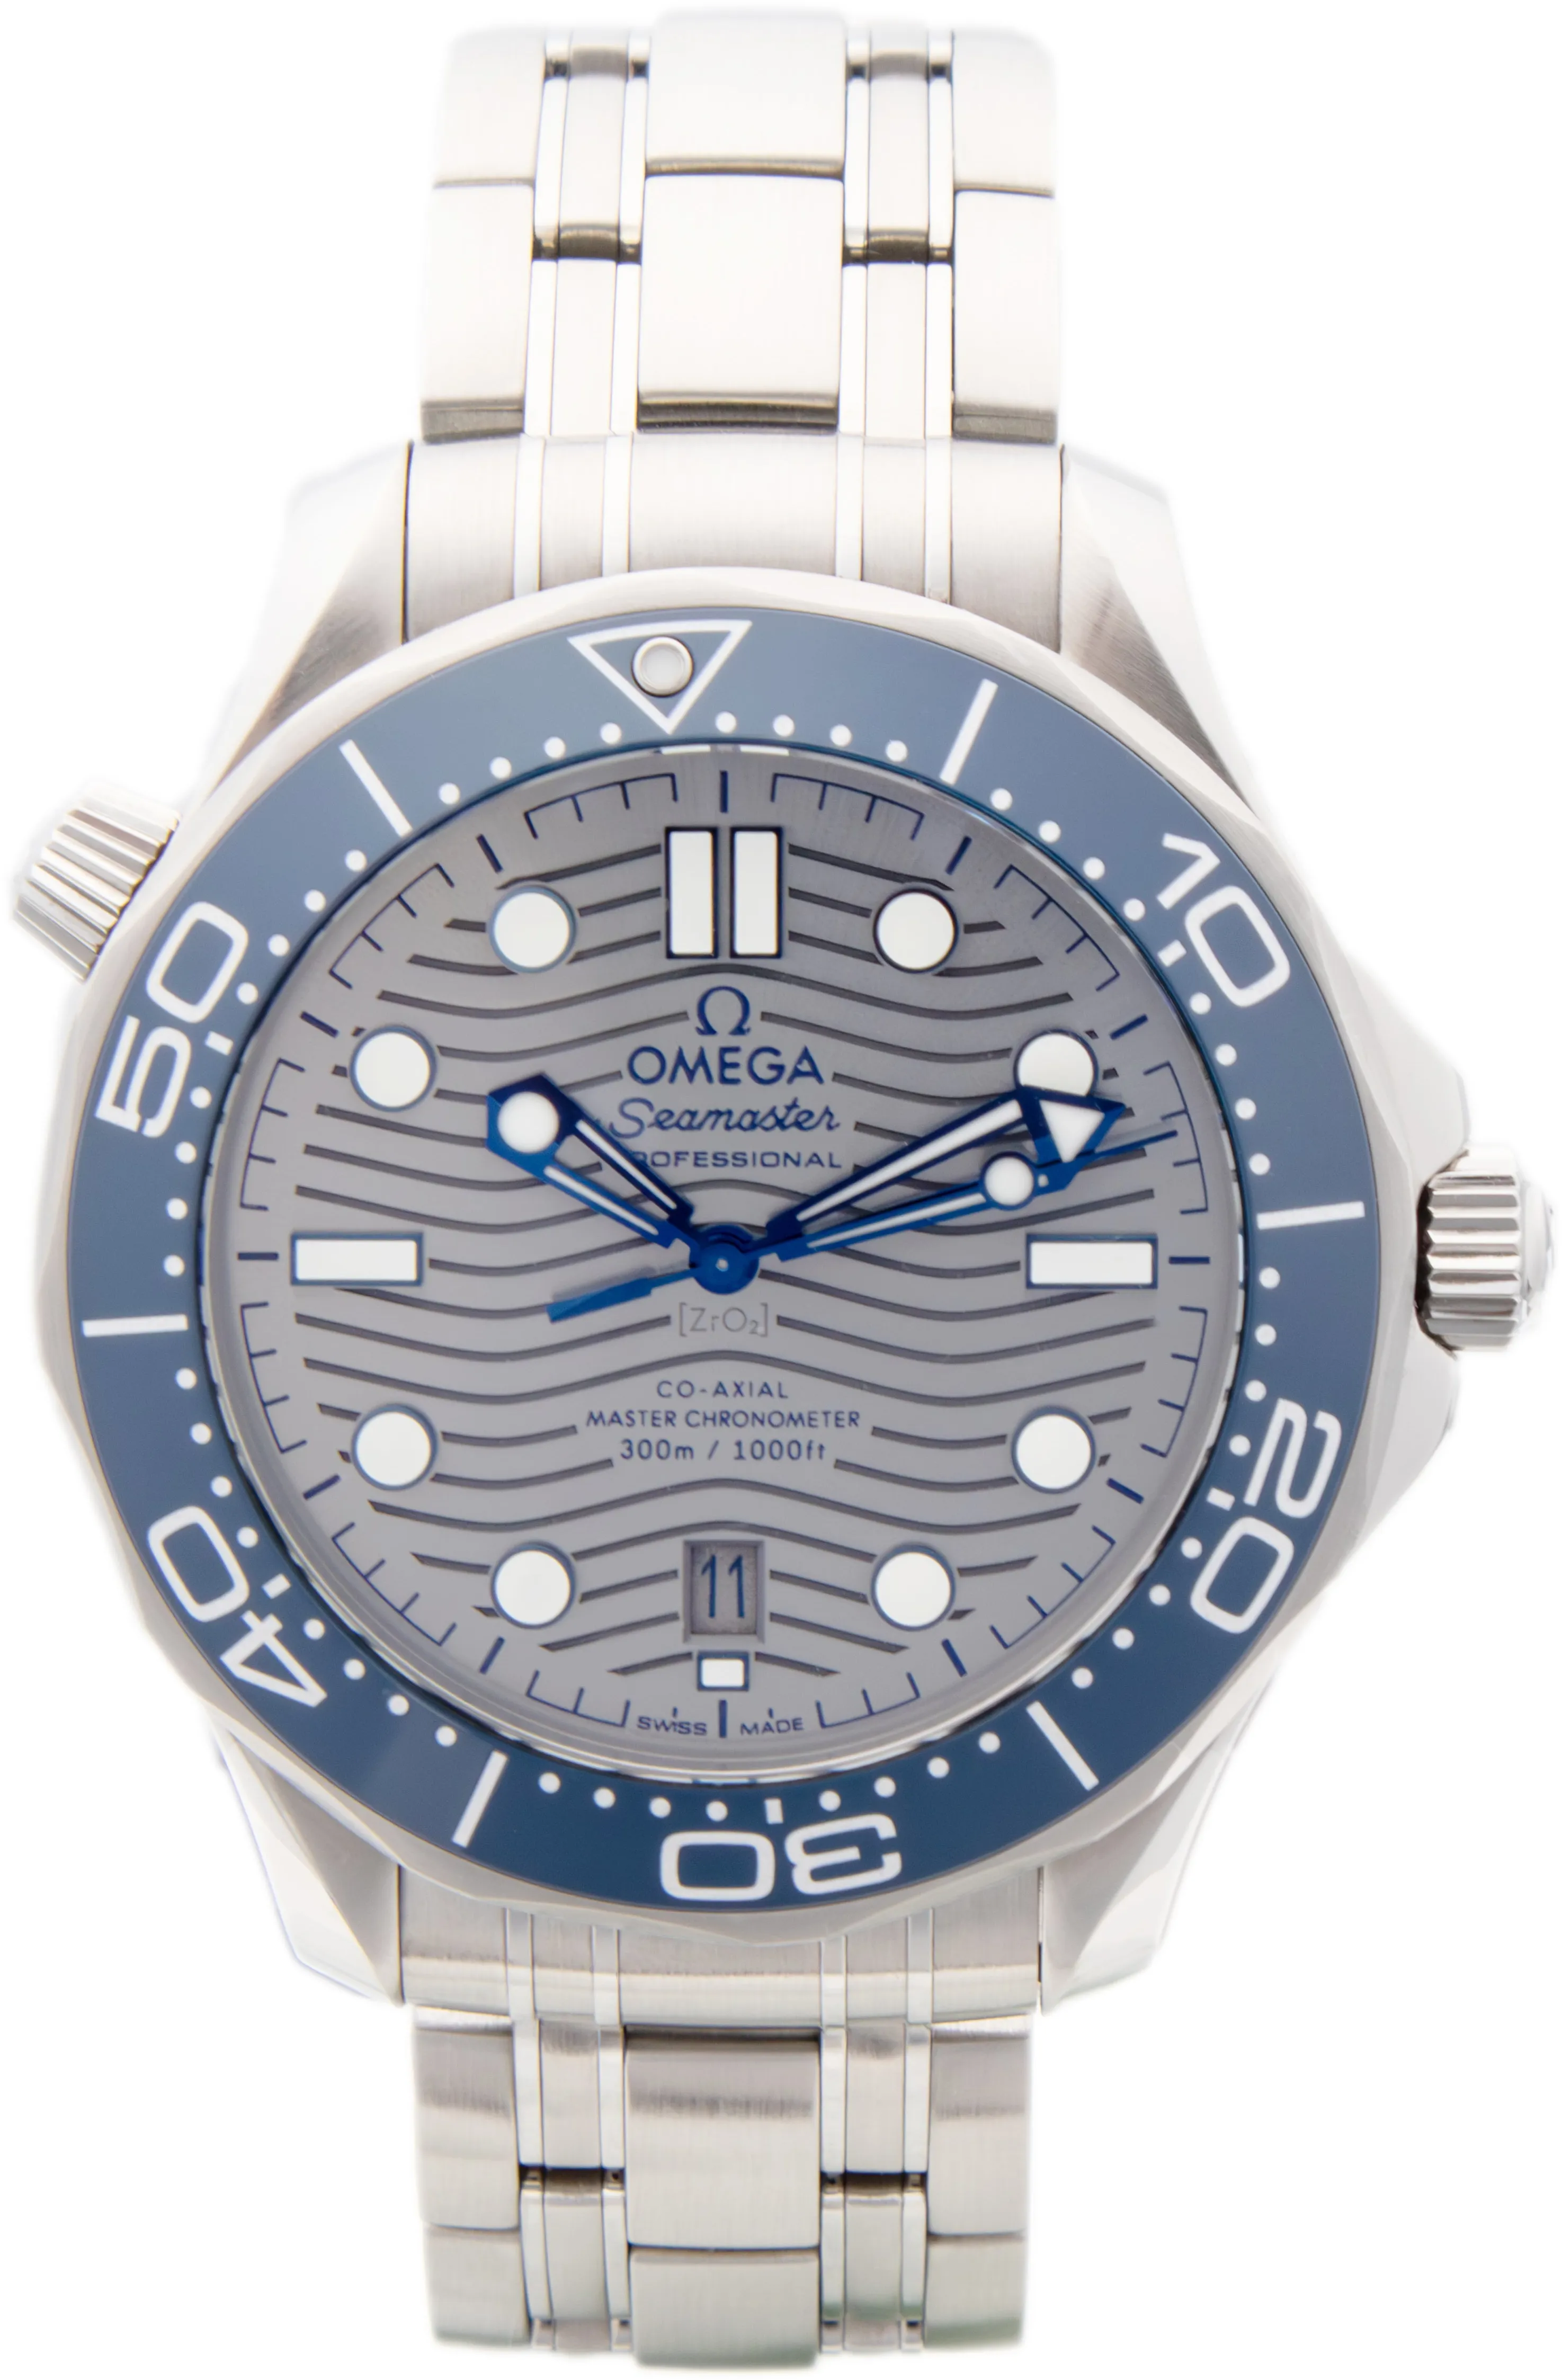 Omega Seamaster Diver 300M 210.30.42.20.06.001 42mm Stainless steel Blue